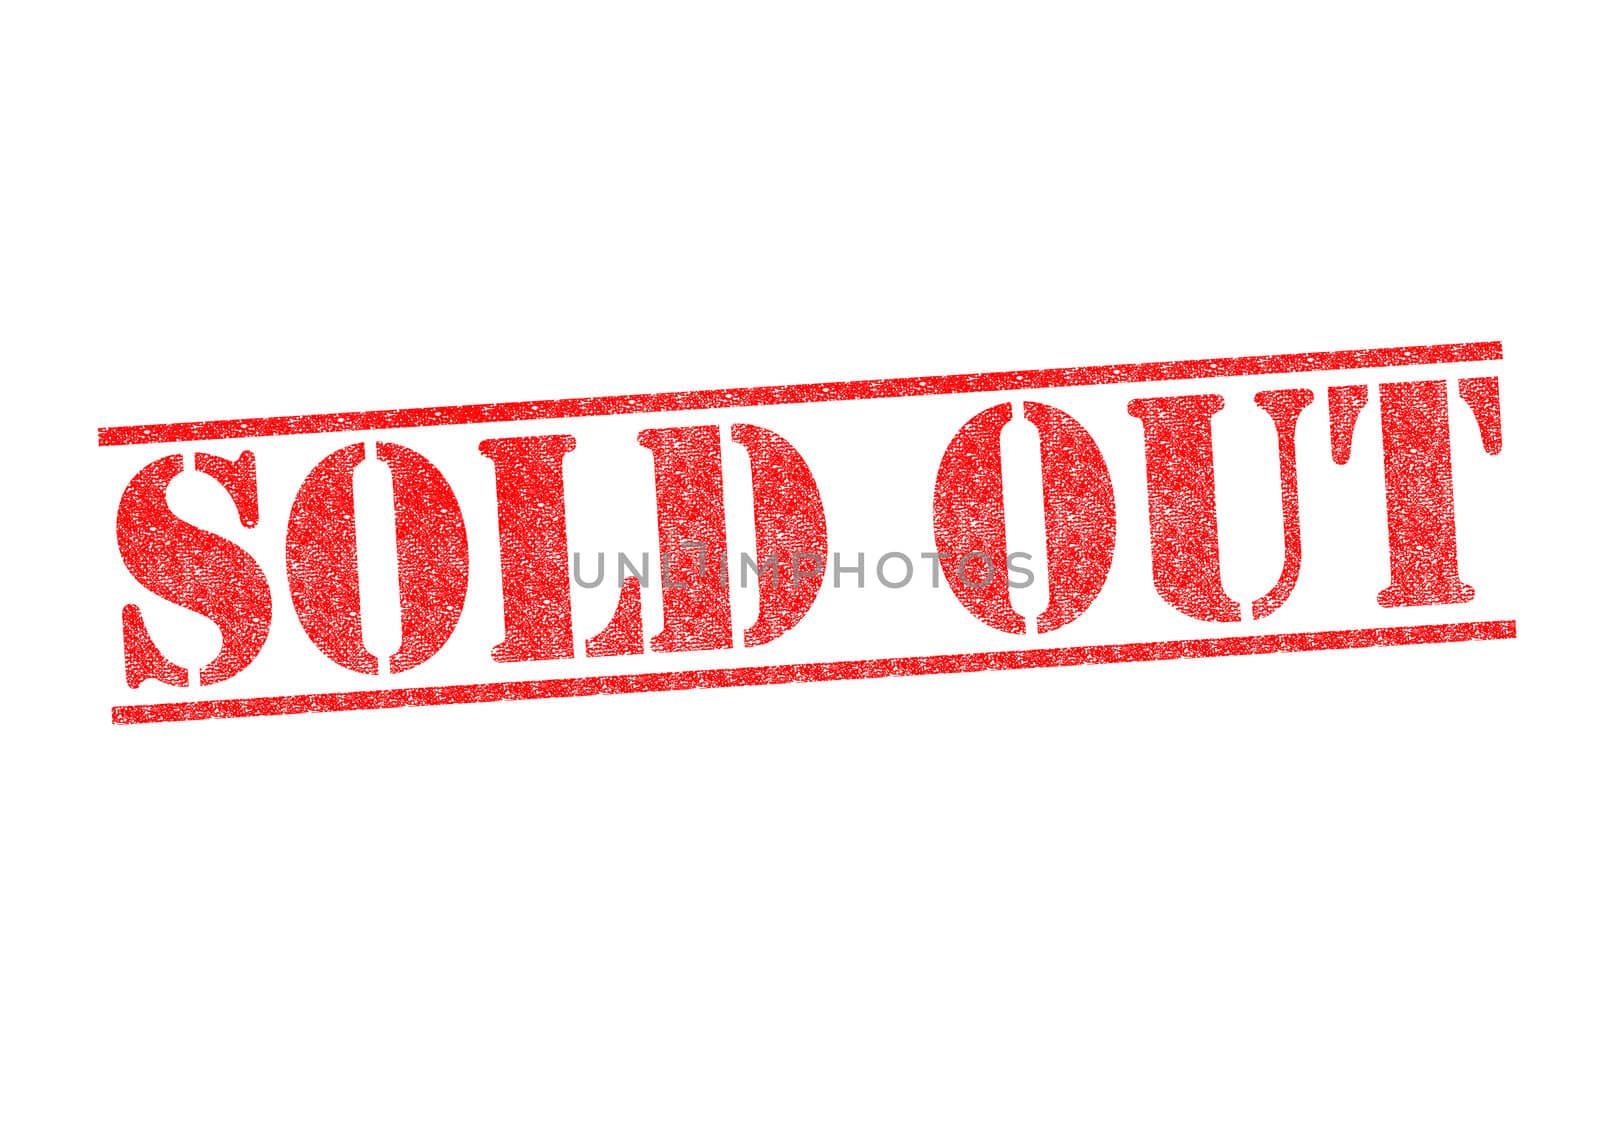 SOLD OUT red rubber stamp over a white background.